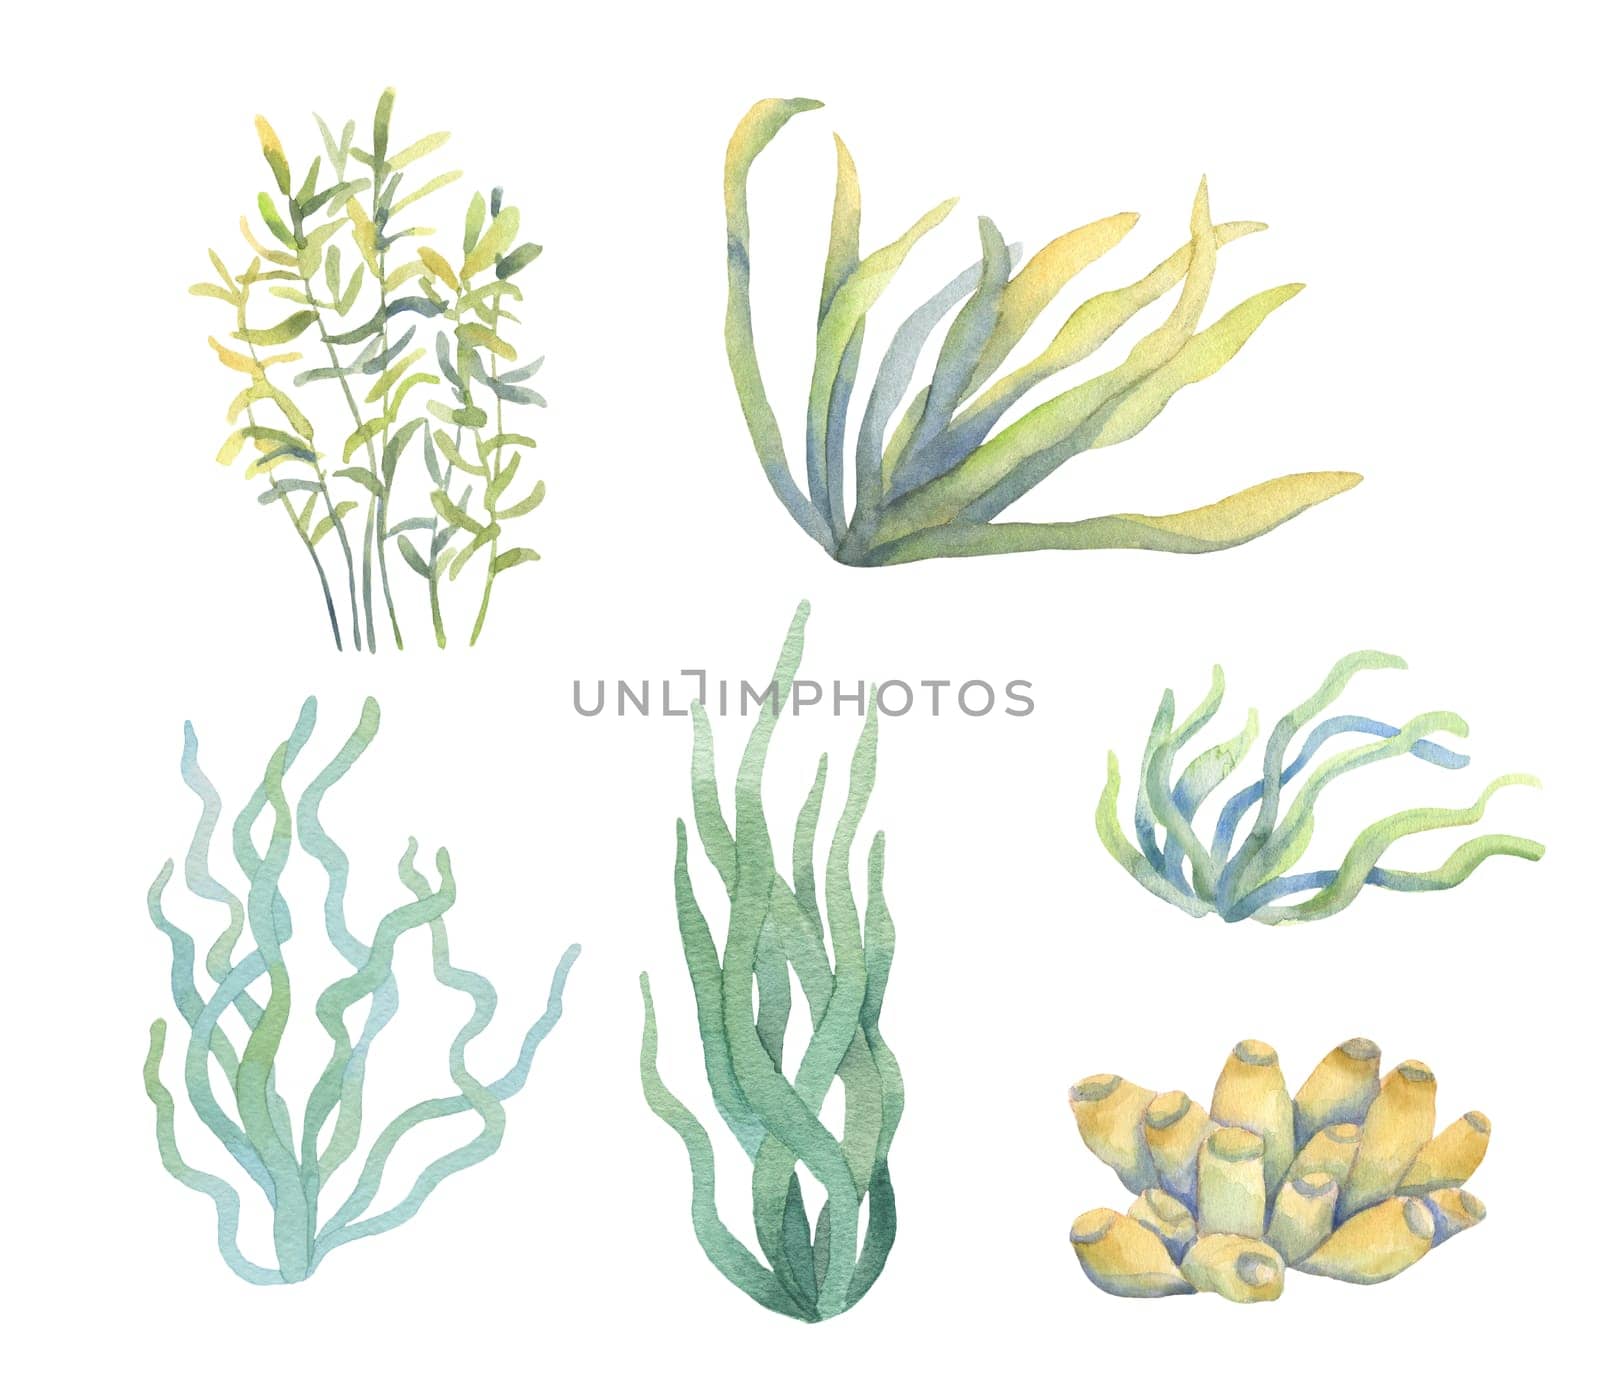 Watercolor set with seaweed. Hand painted underwater floral illustrations with algae leaves branch isolated on white background.